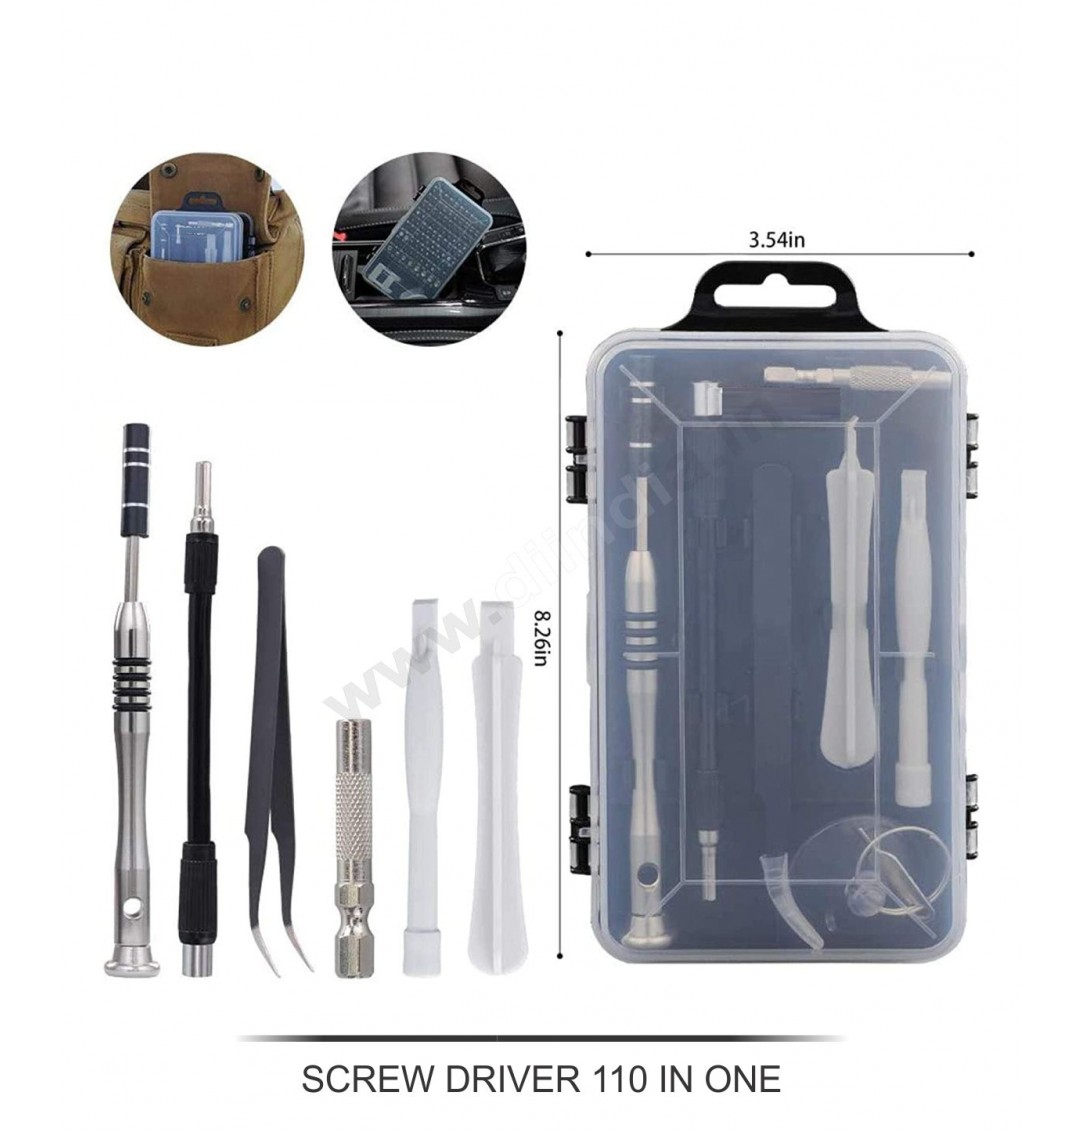 SCREW DRIVER 110 IN ONE